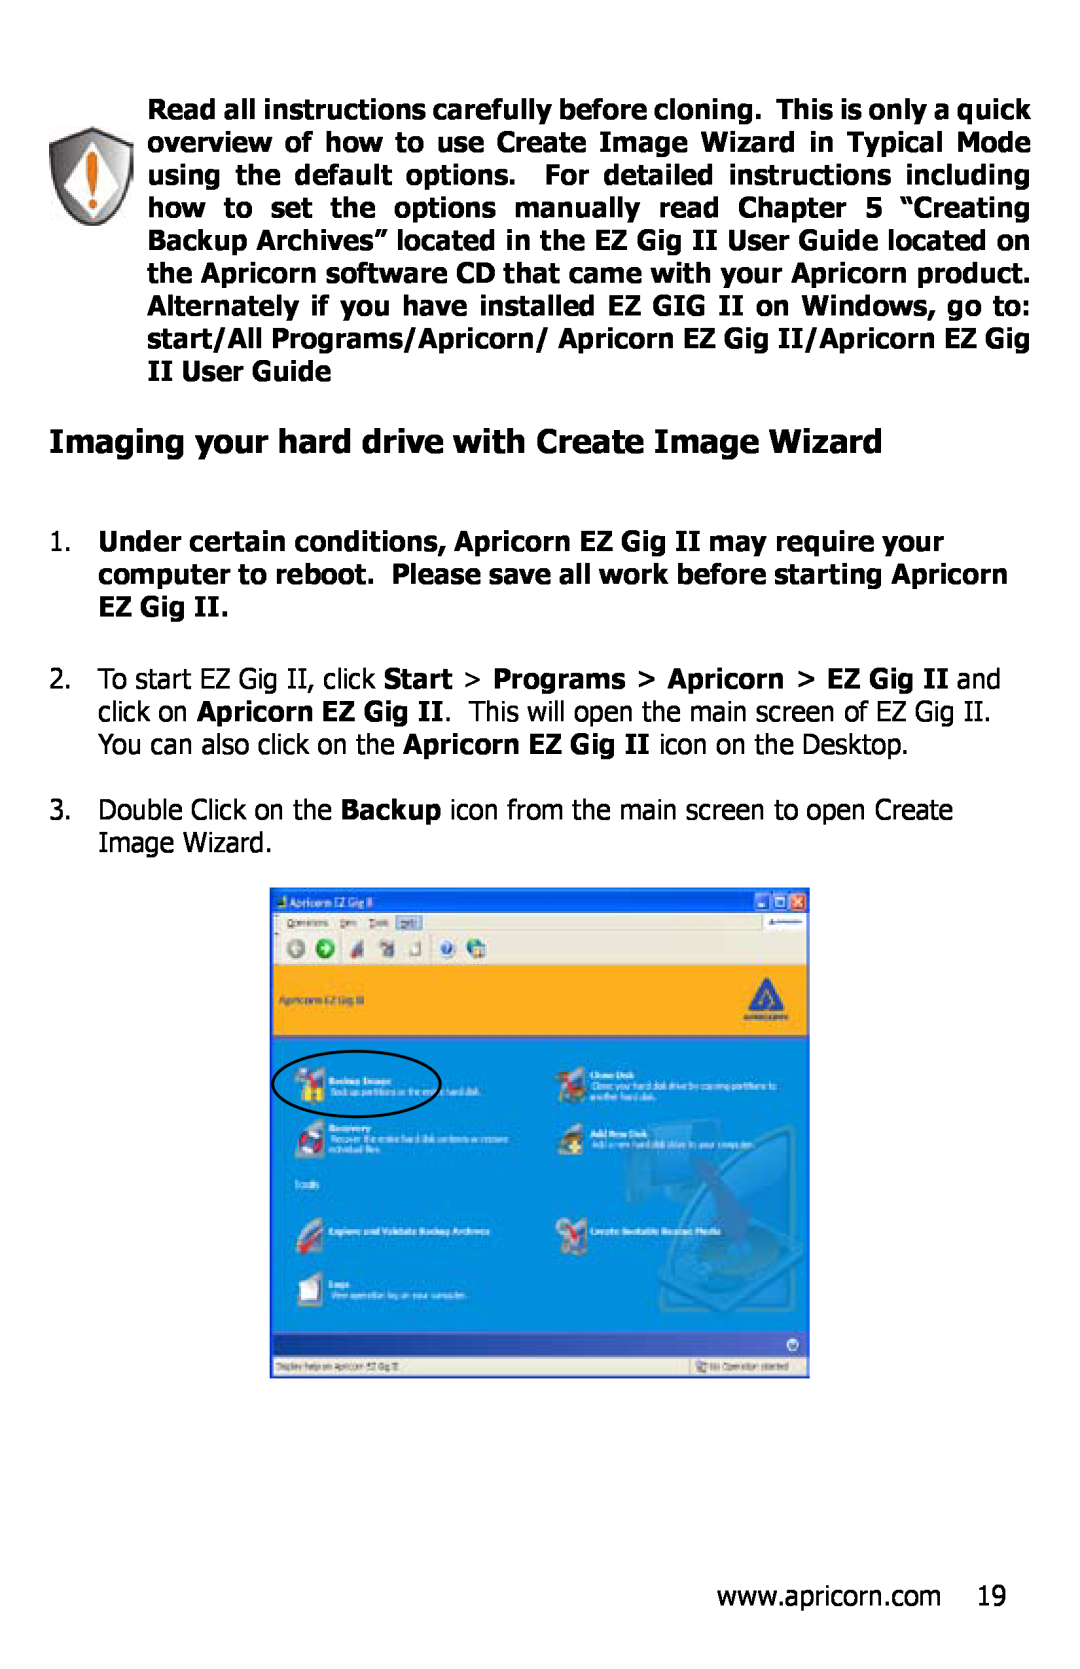 Apricorn EZ Bus DTS manual Imaging your hard drive with Create Image Wizard 